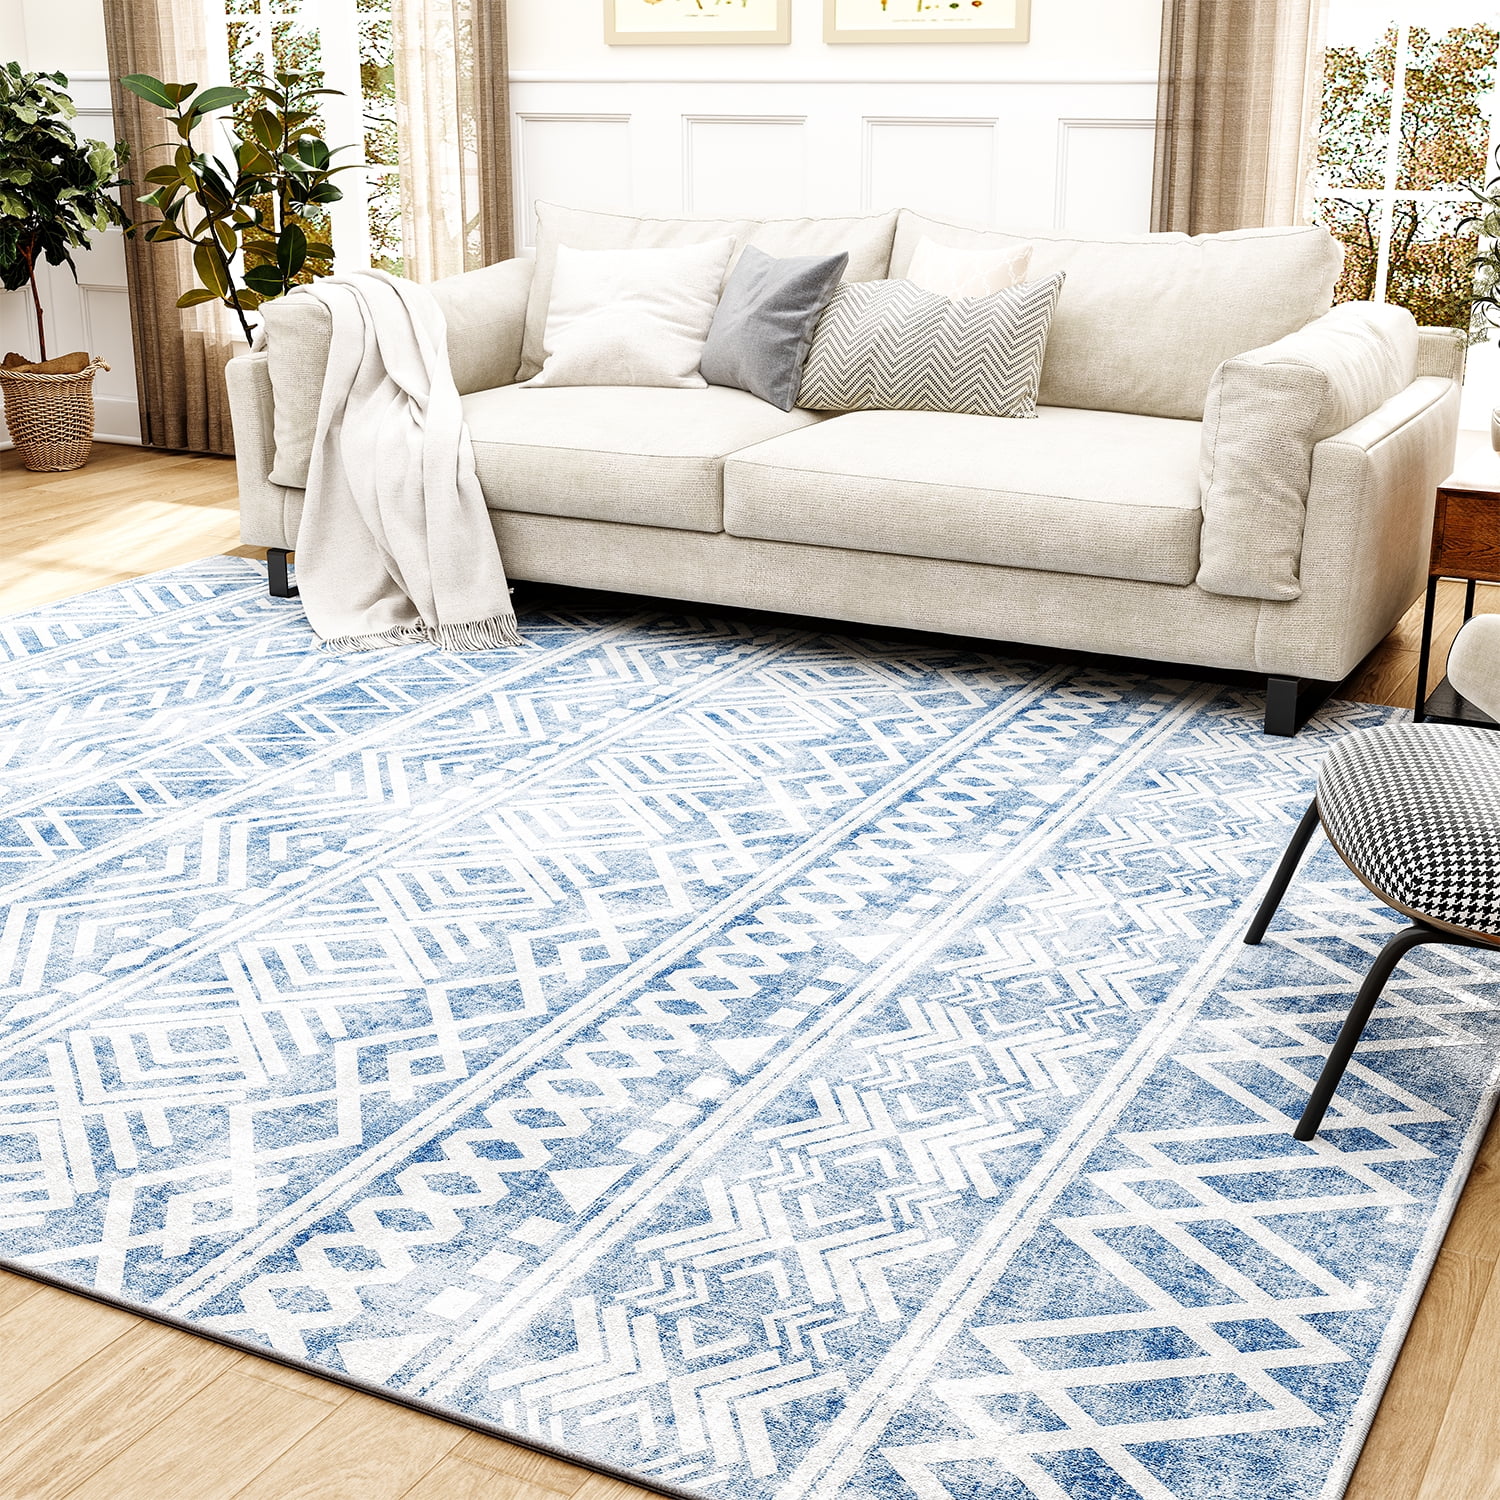 Elevate Your Home Decor with Boho Washable Rugs